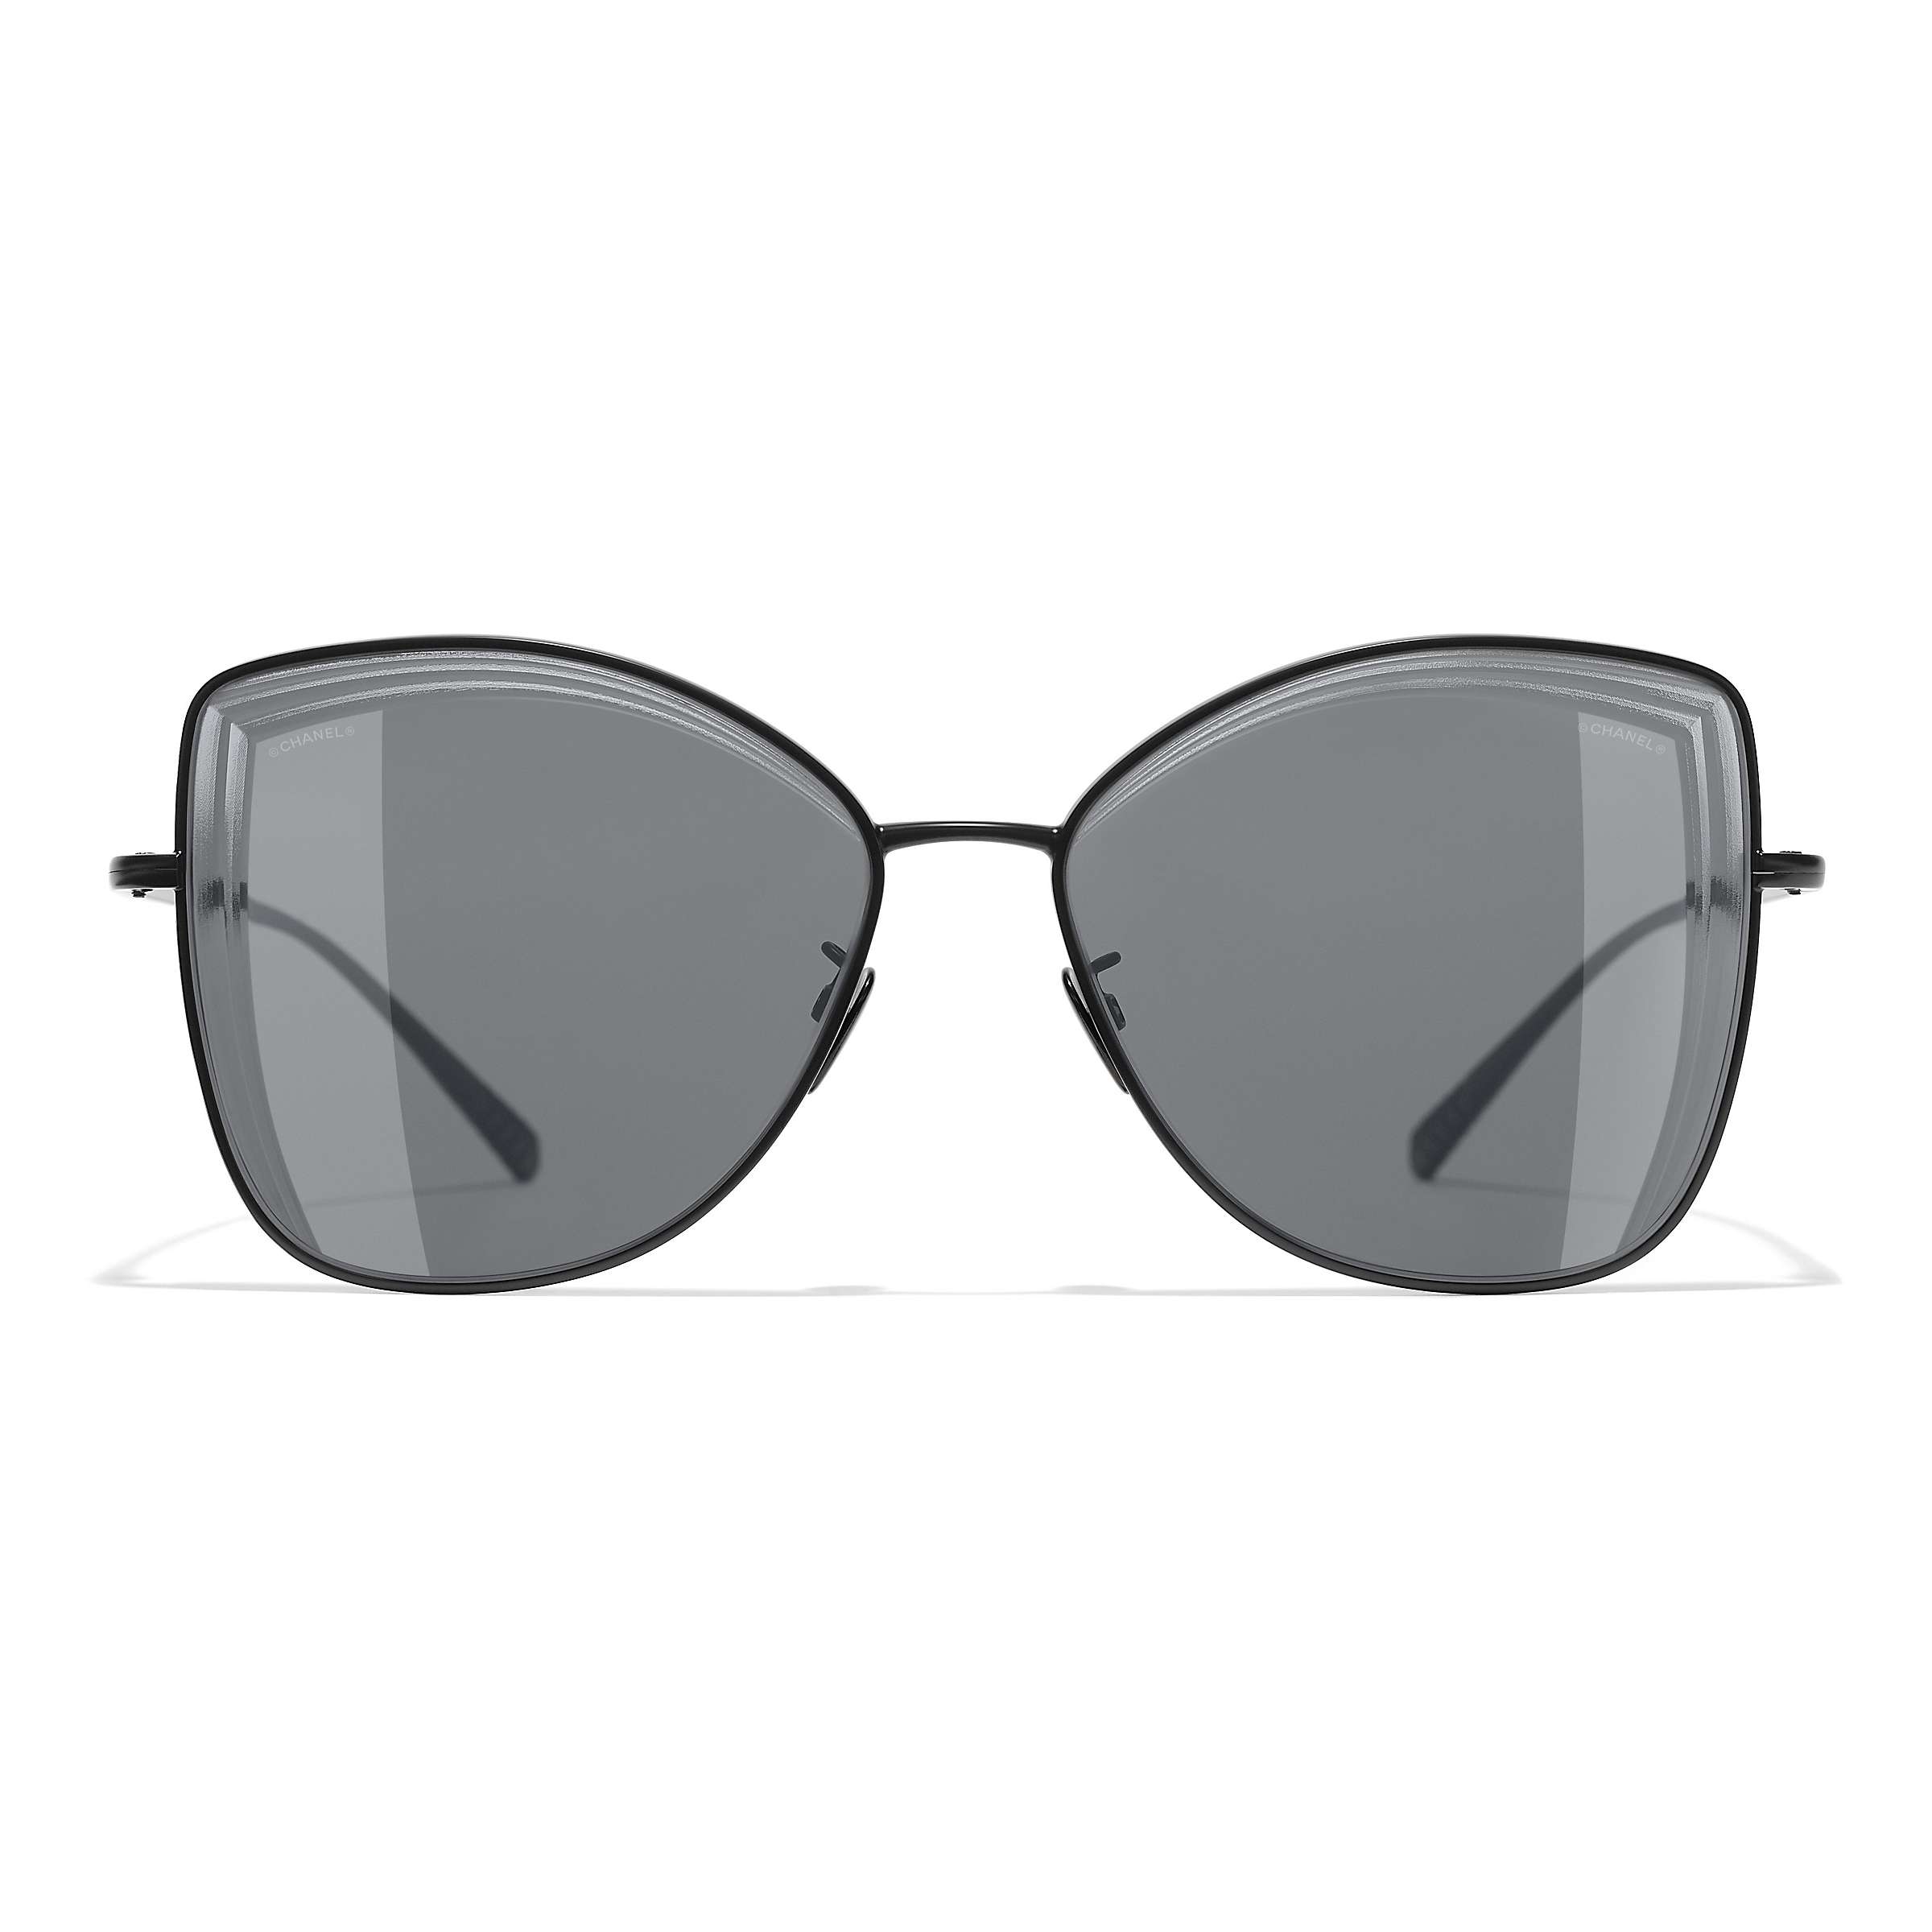 Buy CHANEL Butterfly Sunglasses CH4253 Black/Grey Online at johnlewis.com